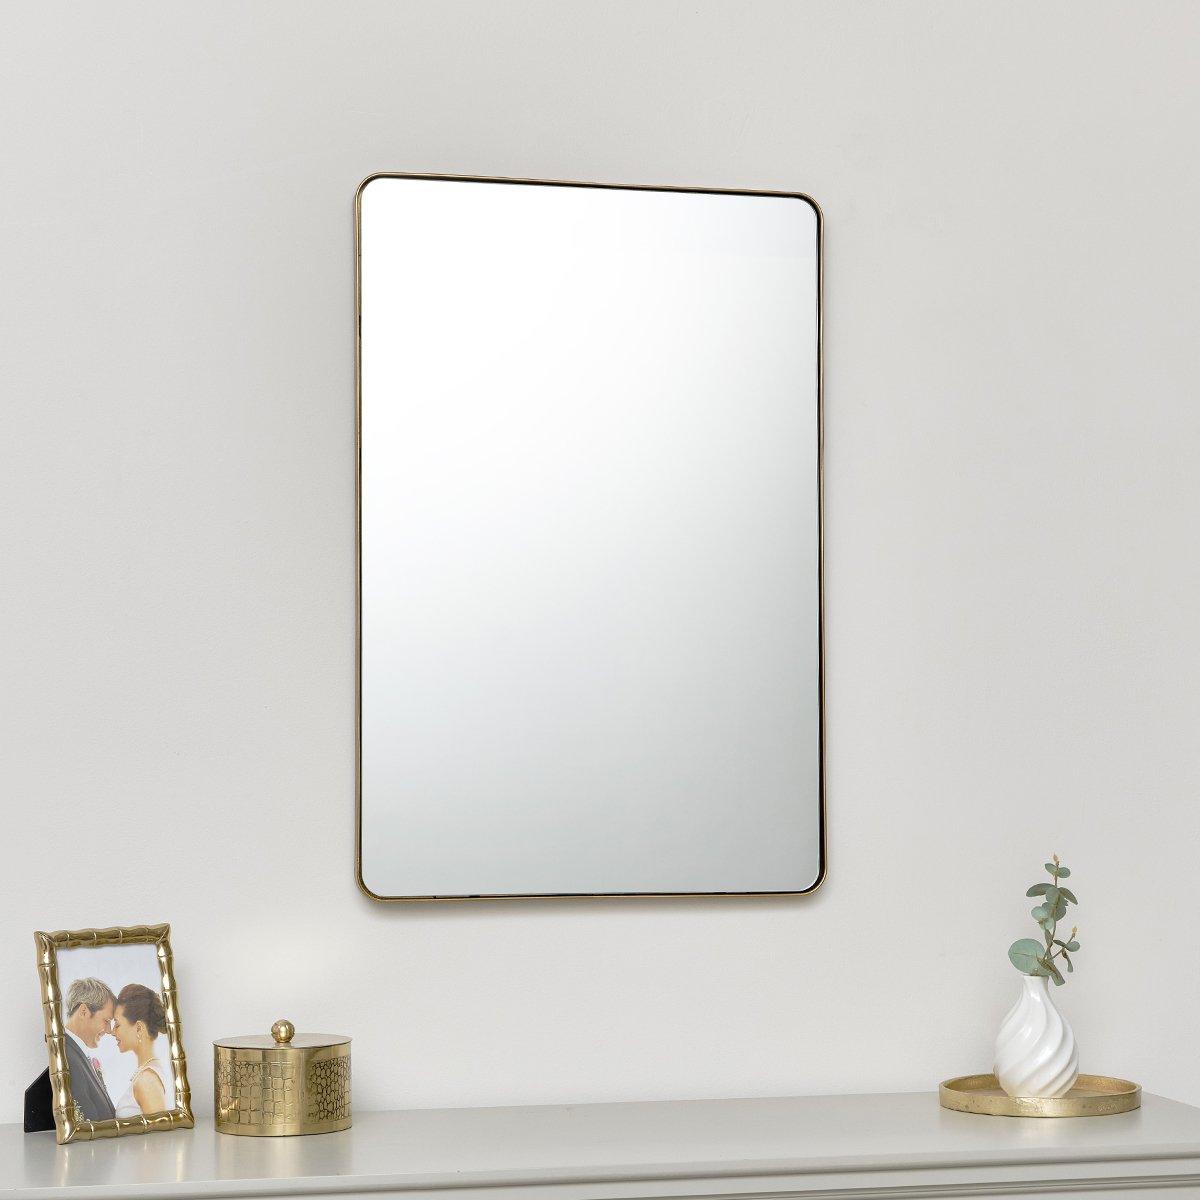 Brushed Gold Thin Framed Wall Mirror 50cm X 75cm